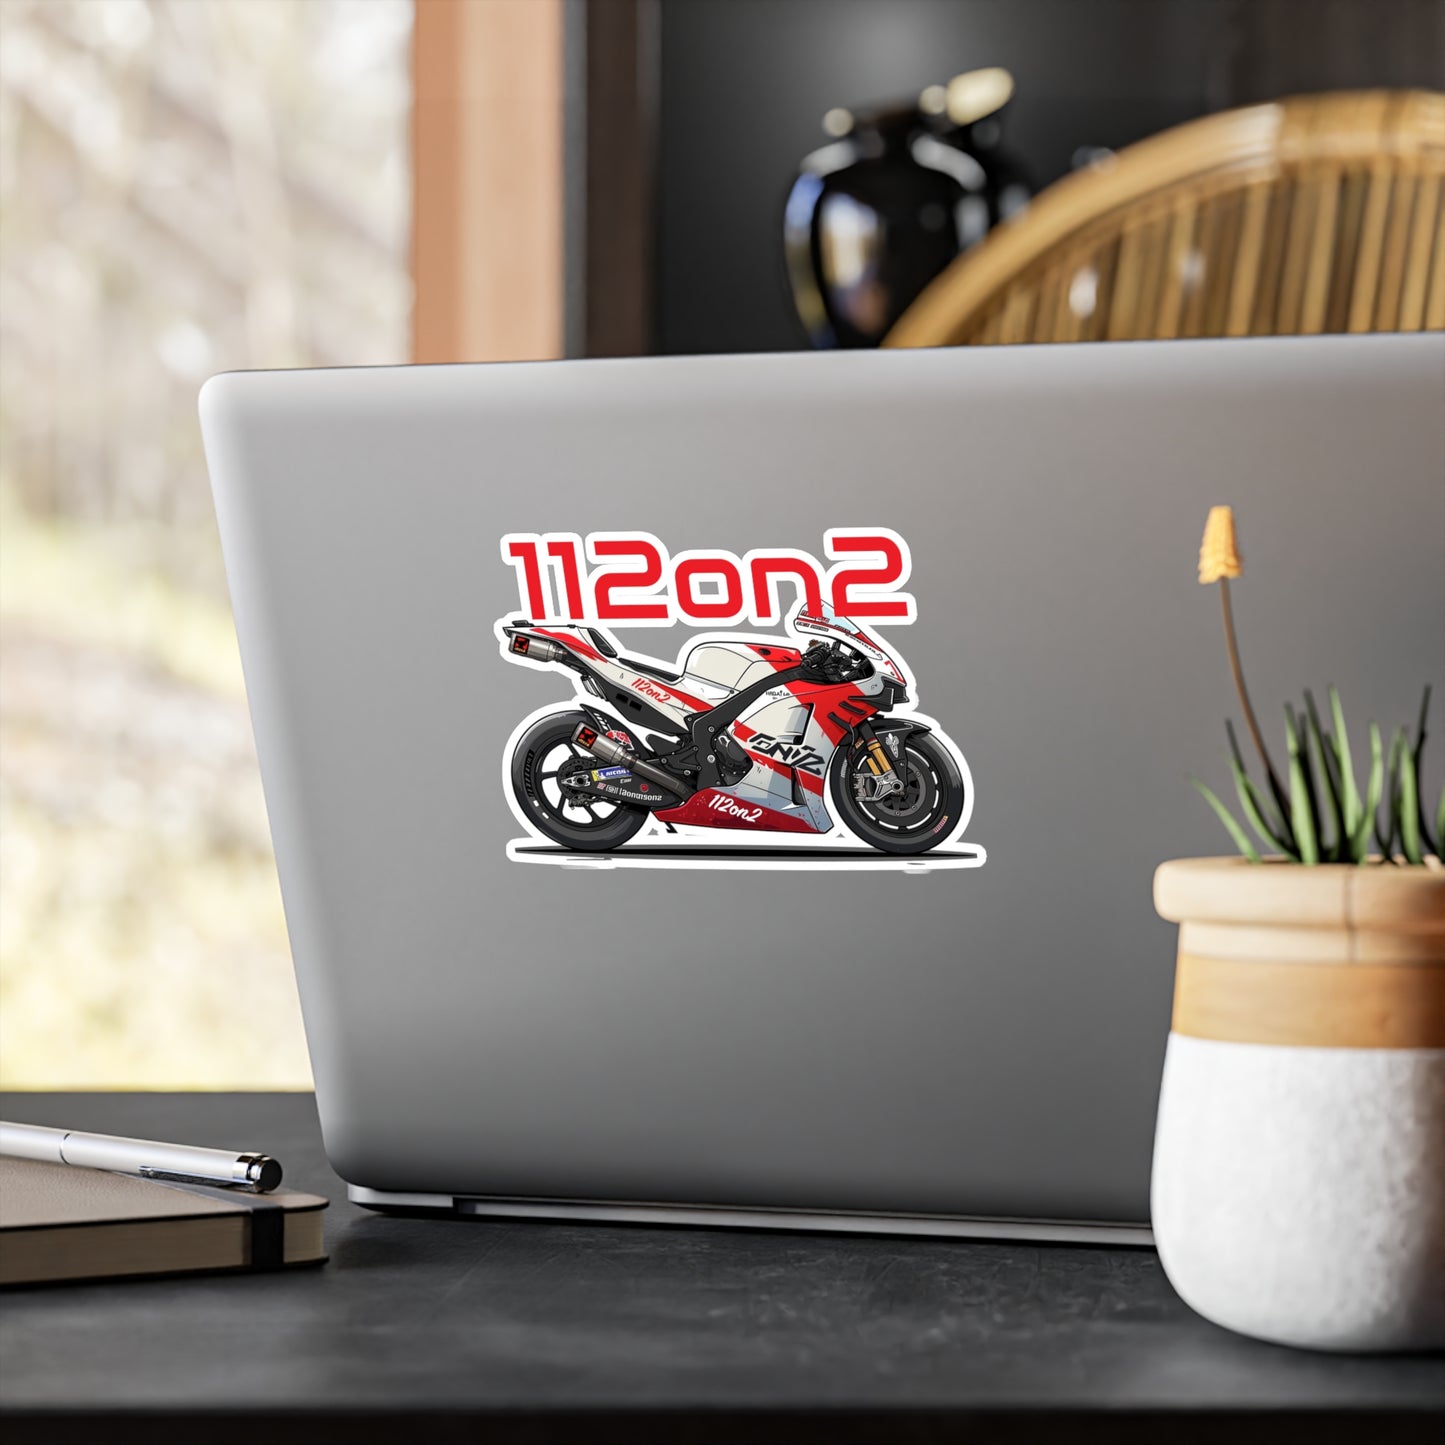 112on2 Cartoon Racing Motorcycle V1 Stickers - 112ON2 SHOP